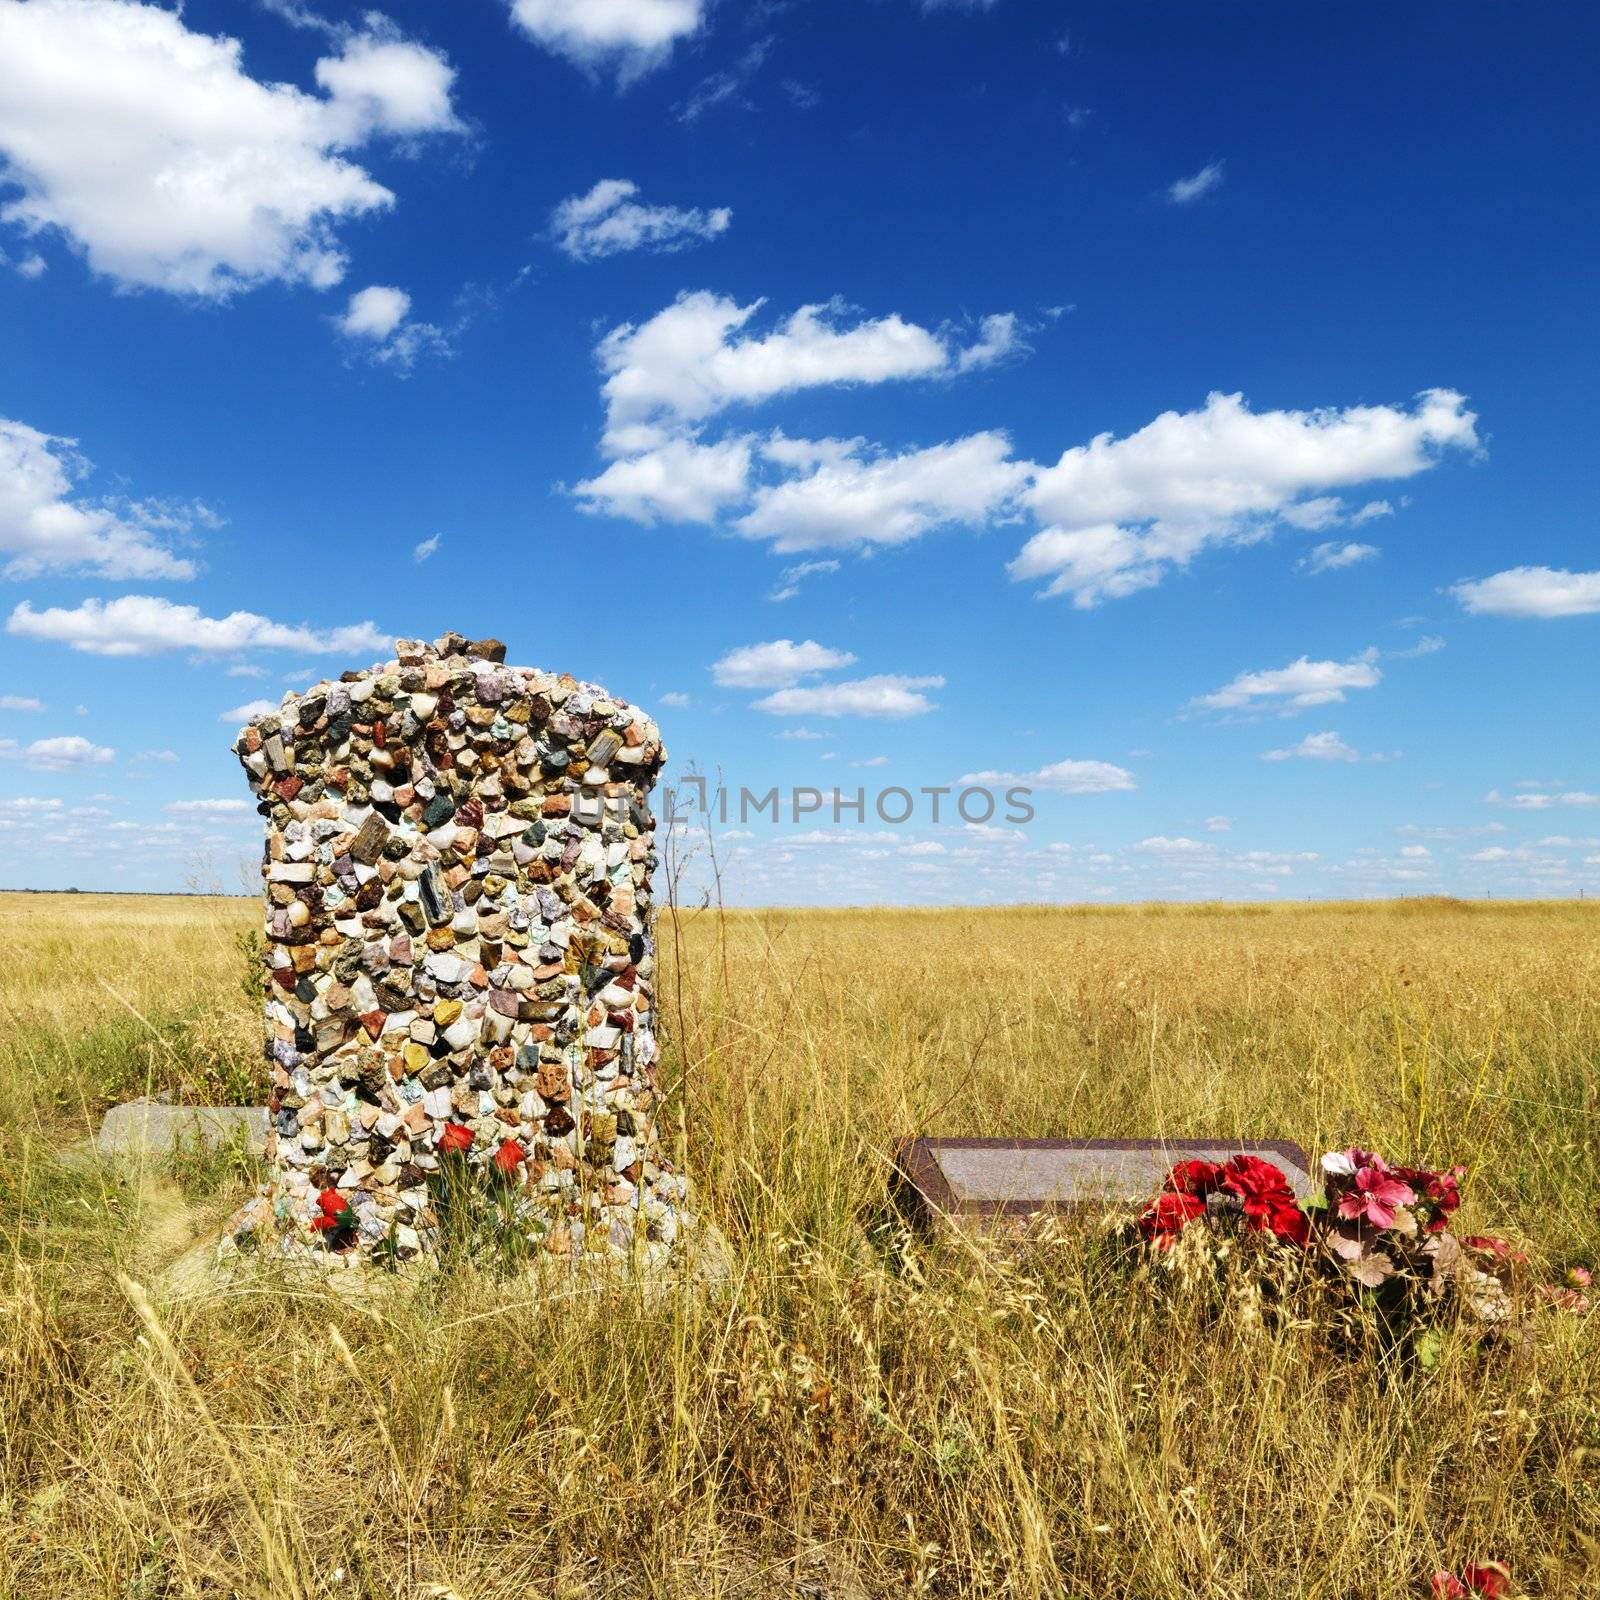 Headstone and grave marker in field.